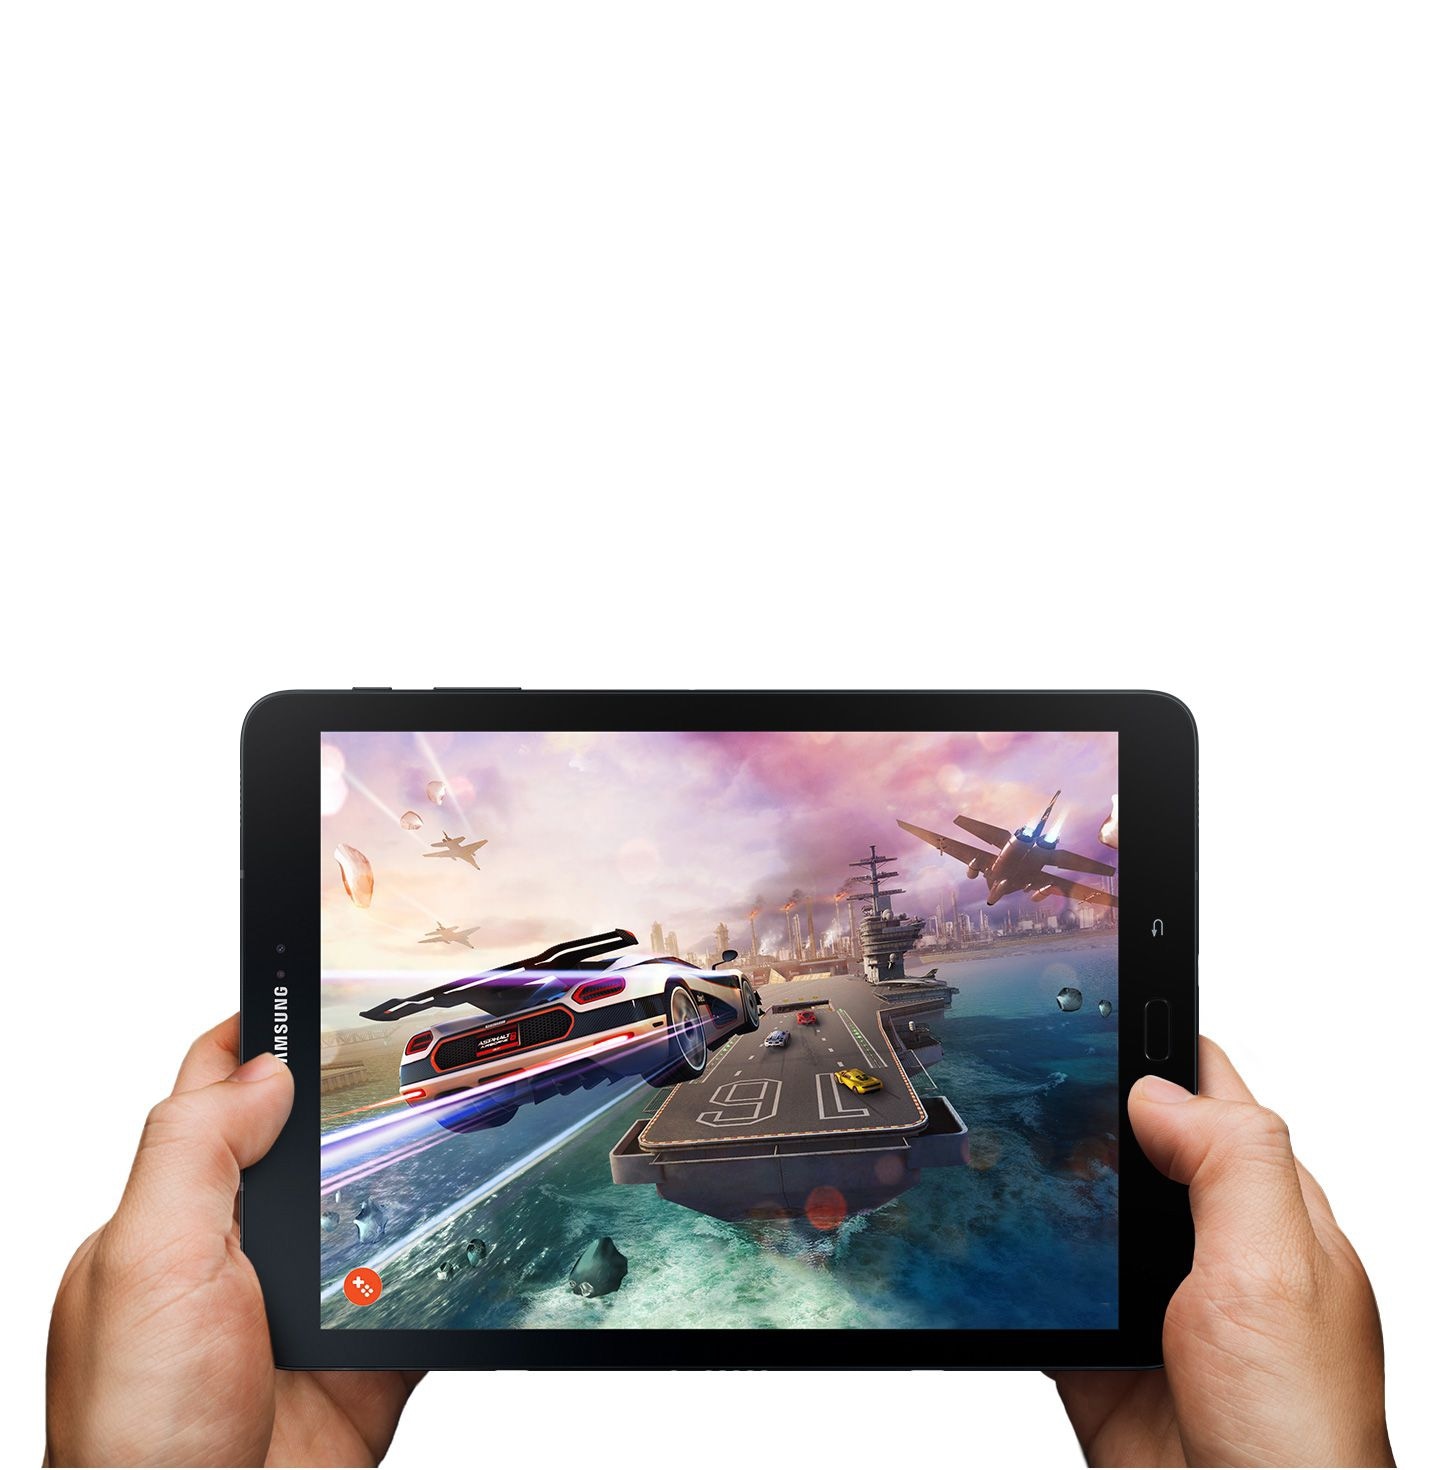 Galaxy Tab S3 being held by two hands and game playing on screen